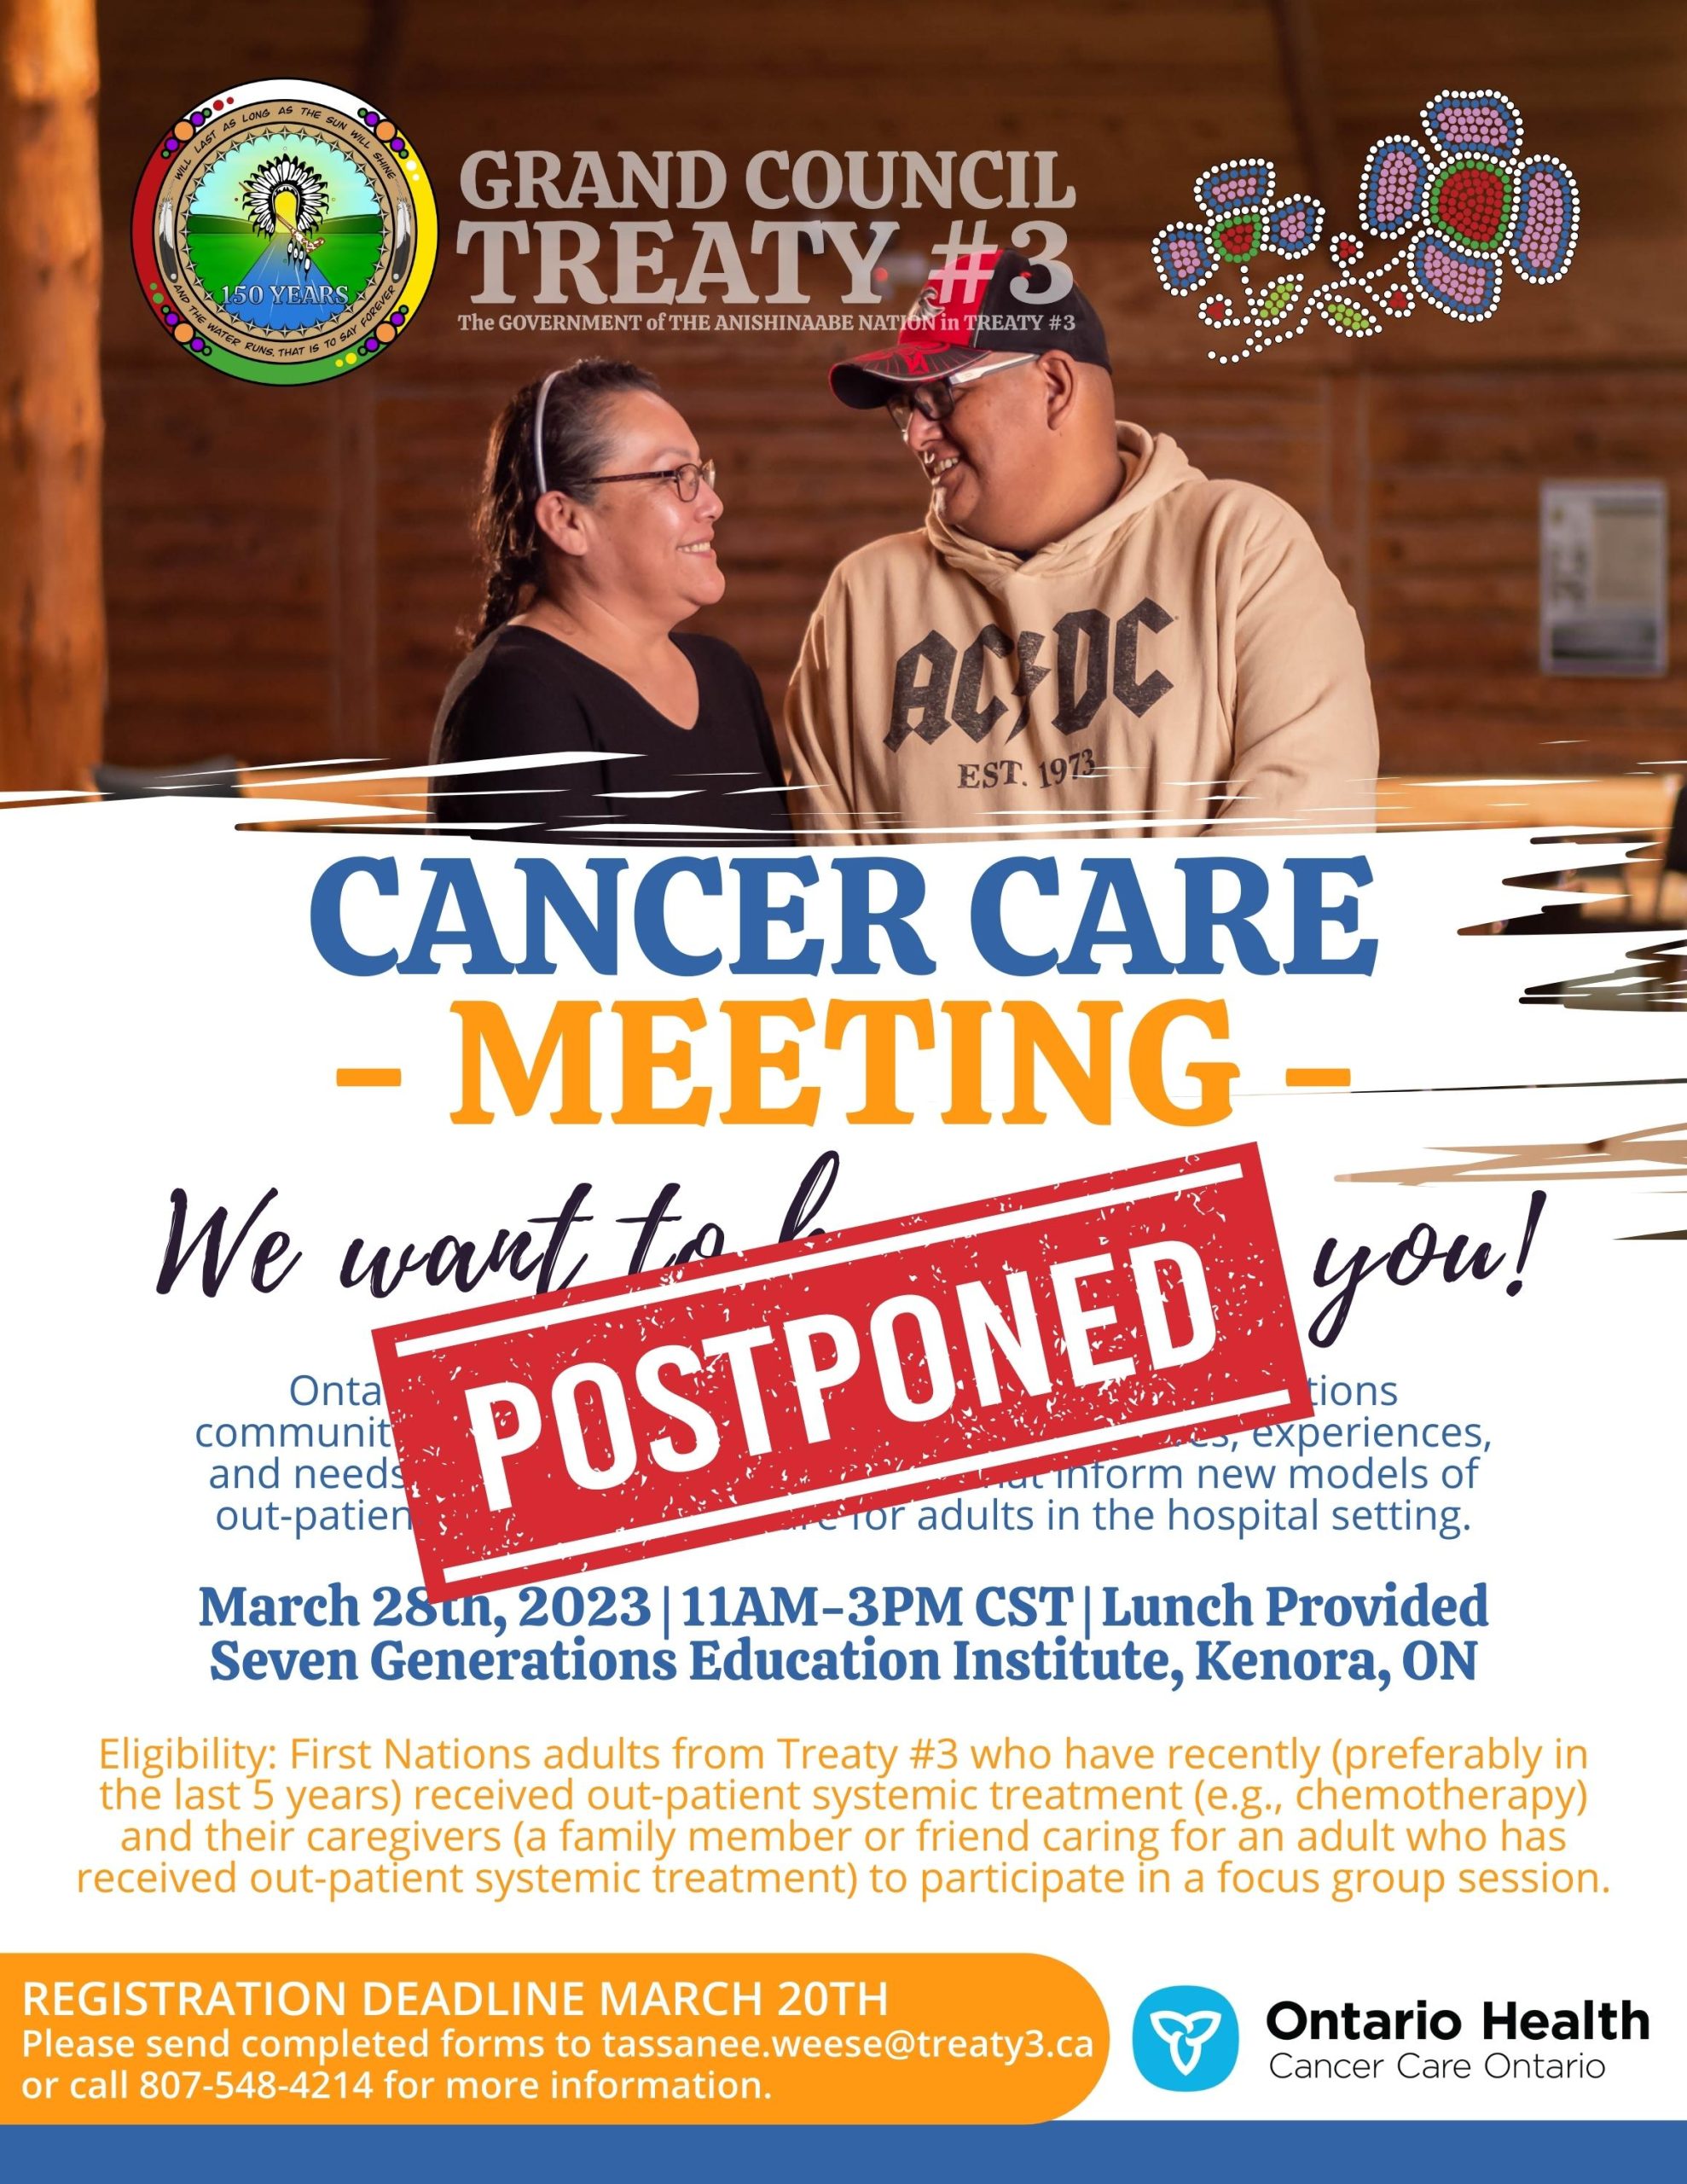 Cancer Care Meeting (POSTPONED)